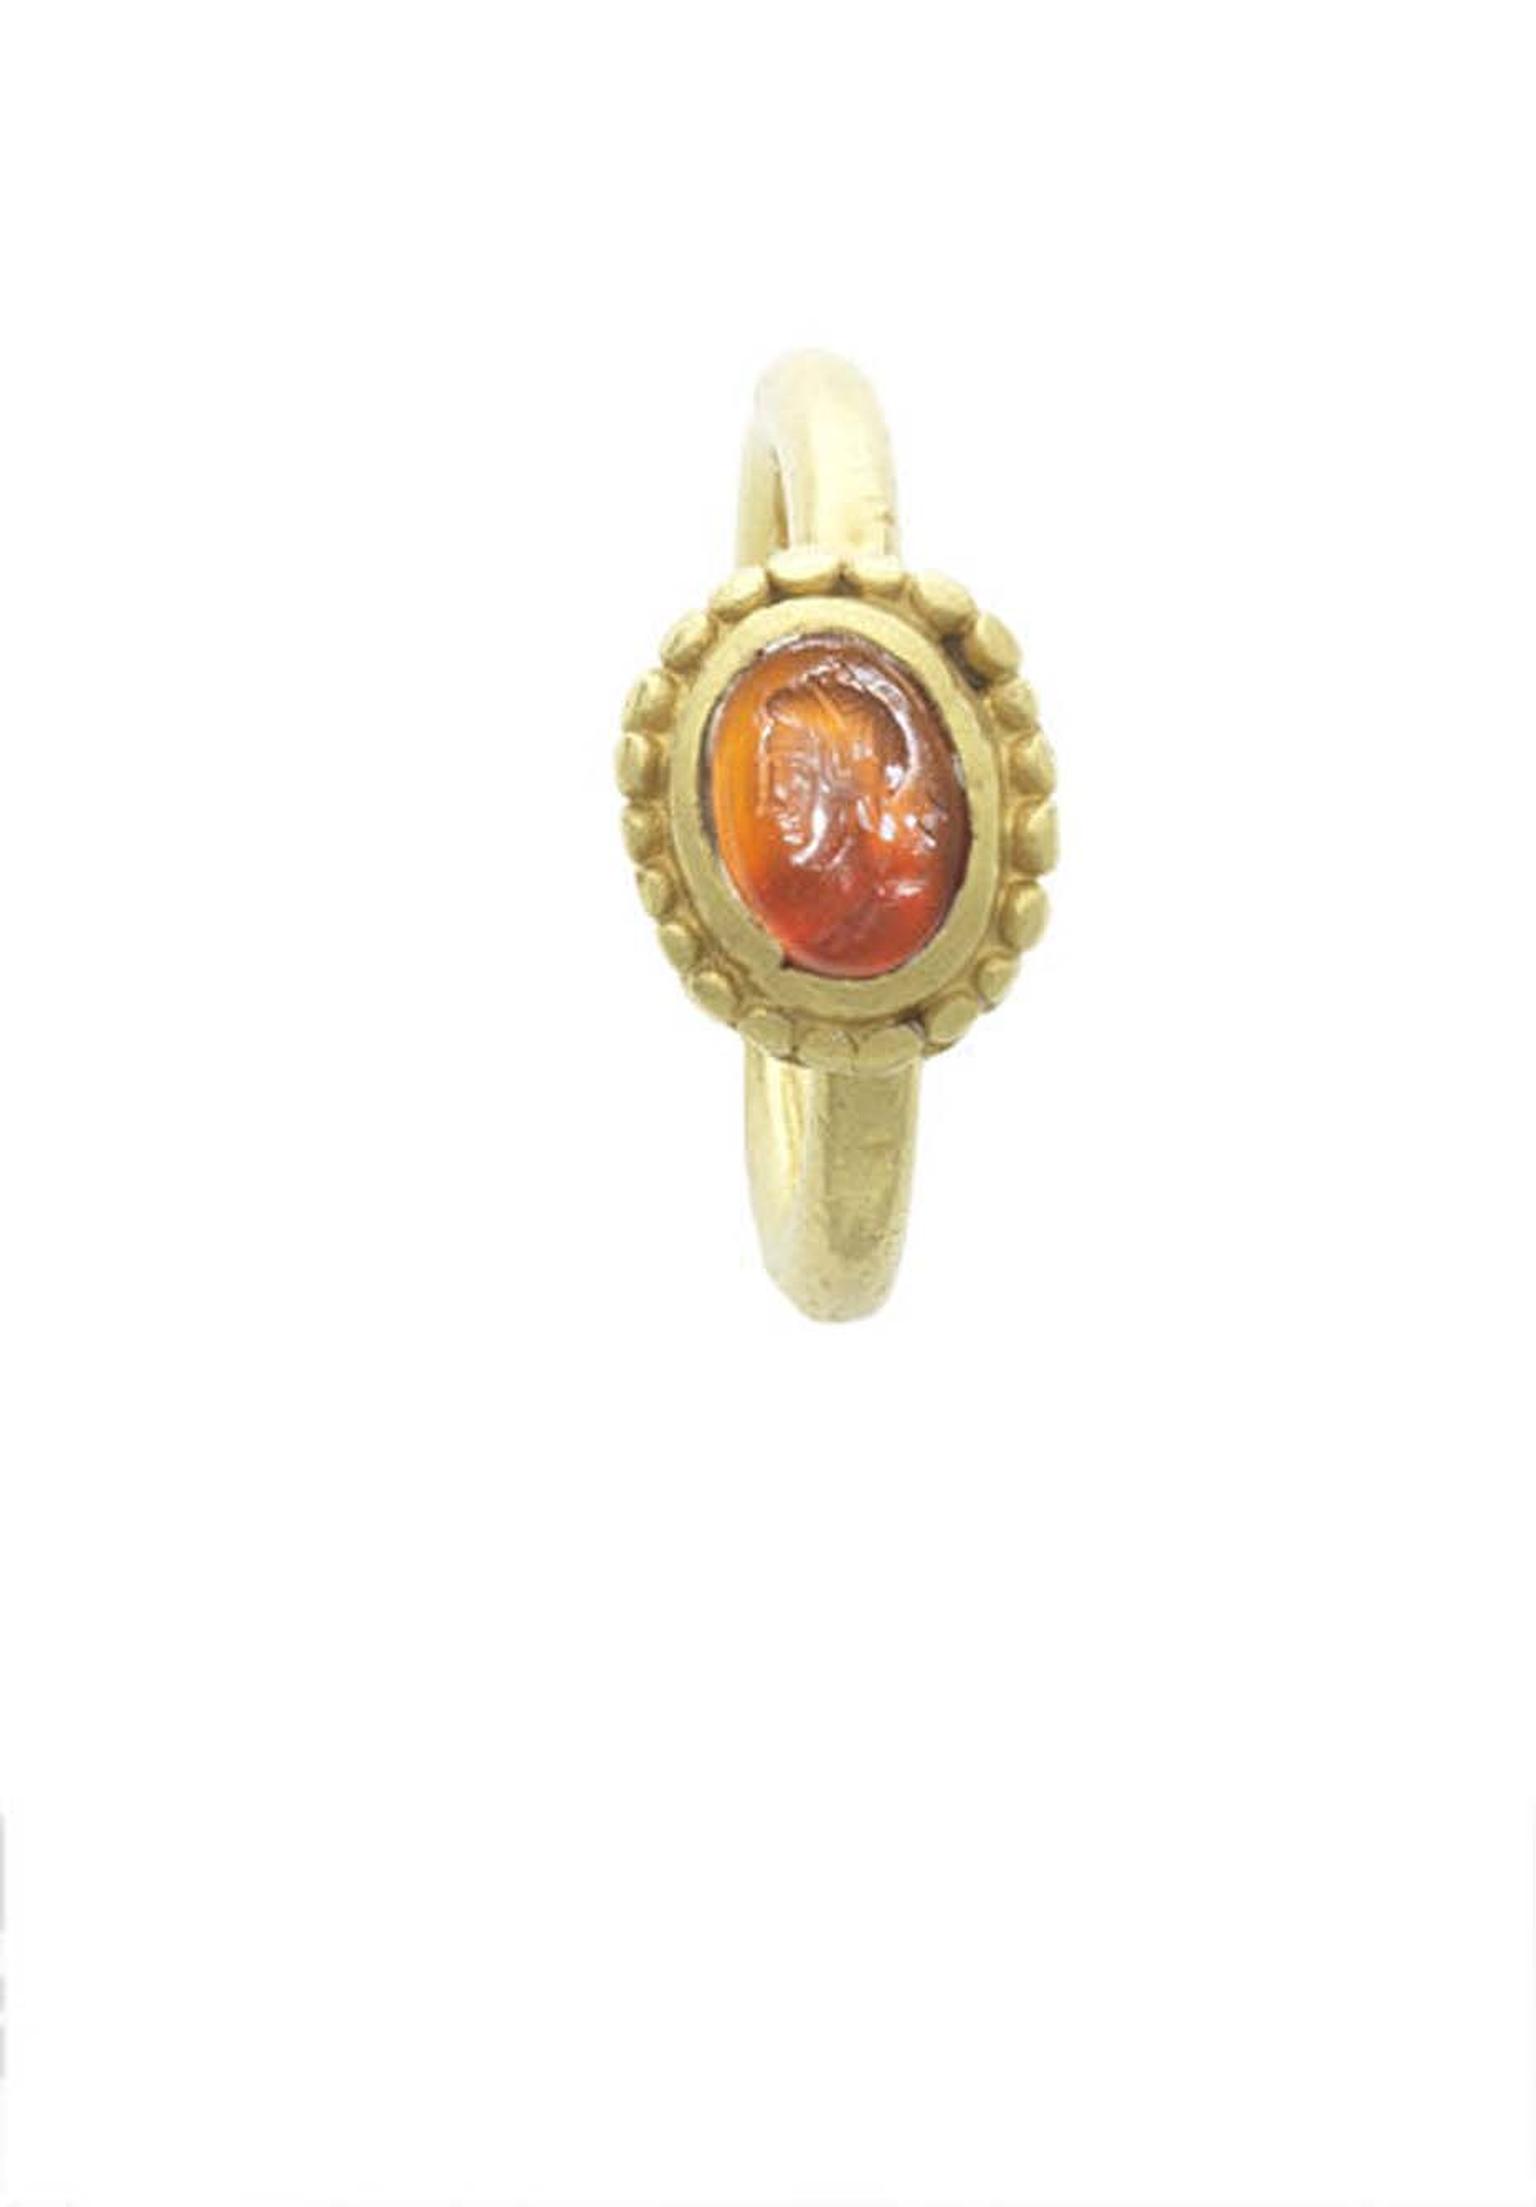 An intaglio ring of Diana, goddess of the hunt, carved with her quiver of arrows in fire orange carnelian stone, dating from circa 5th century AD.